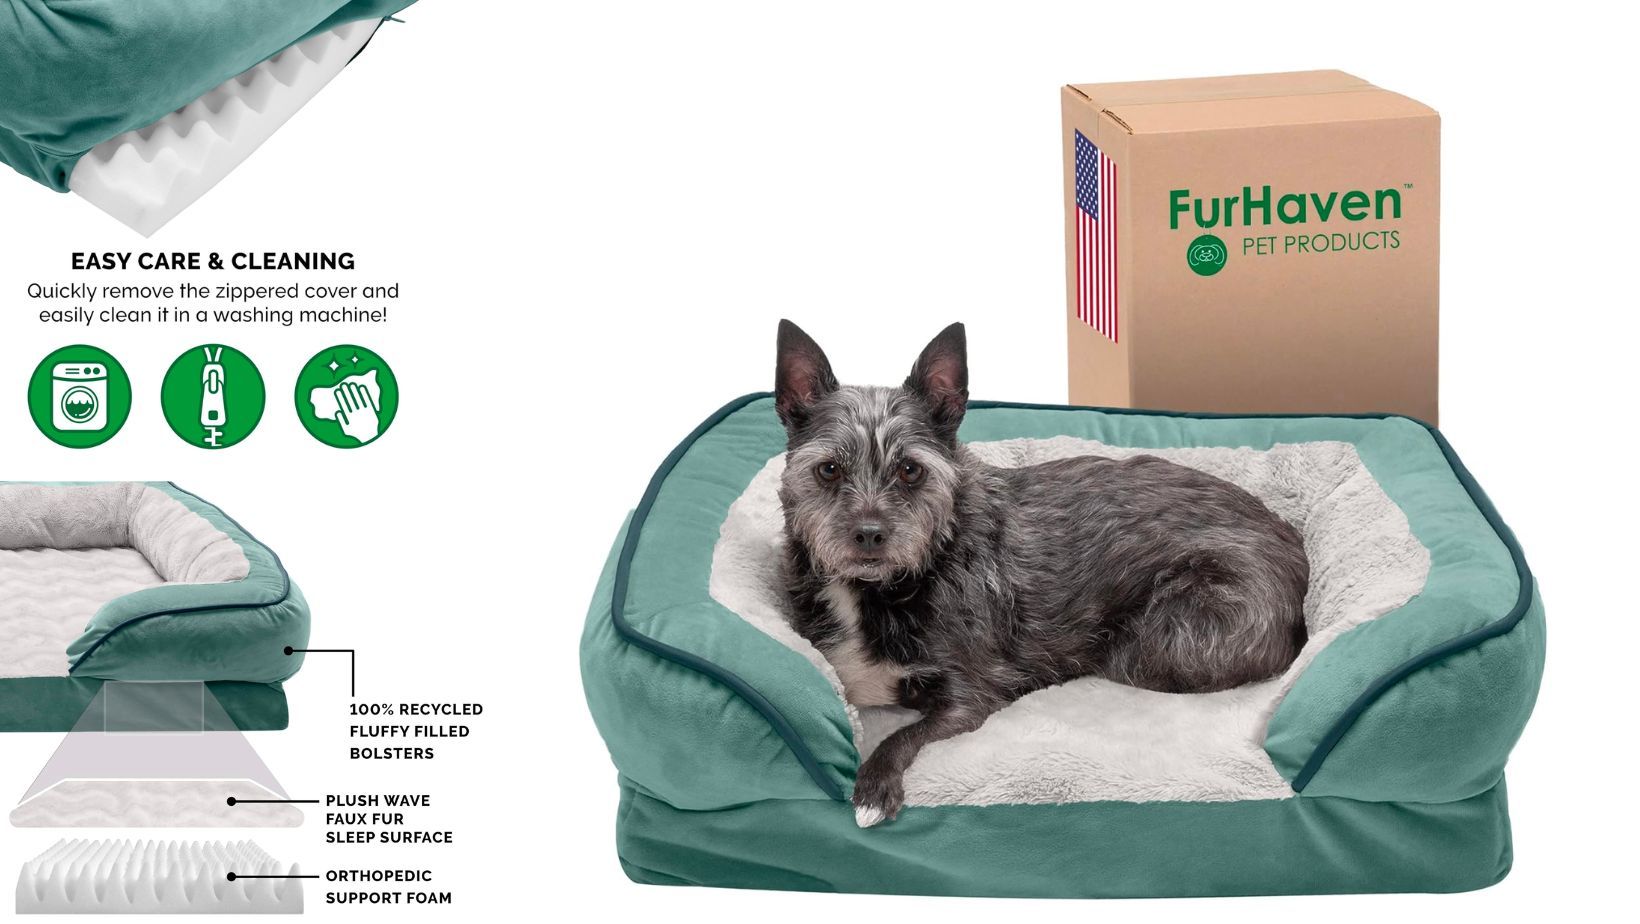 Furhaven Orthopedic Dog Bed for Small Dogs like French Bulldogs 